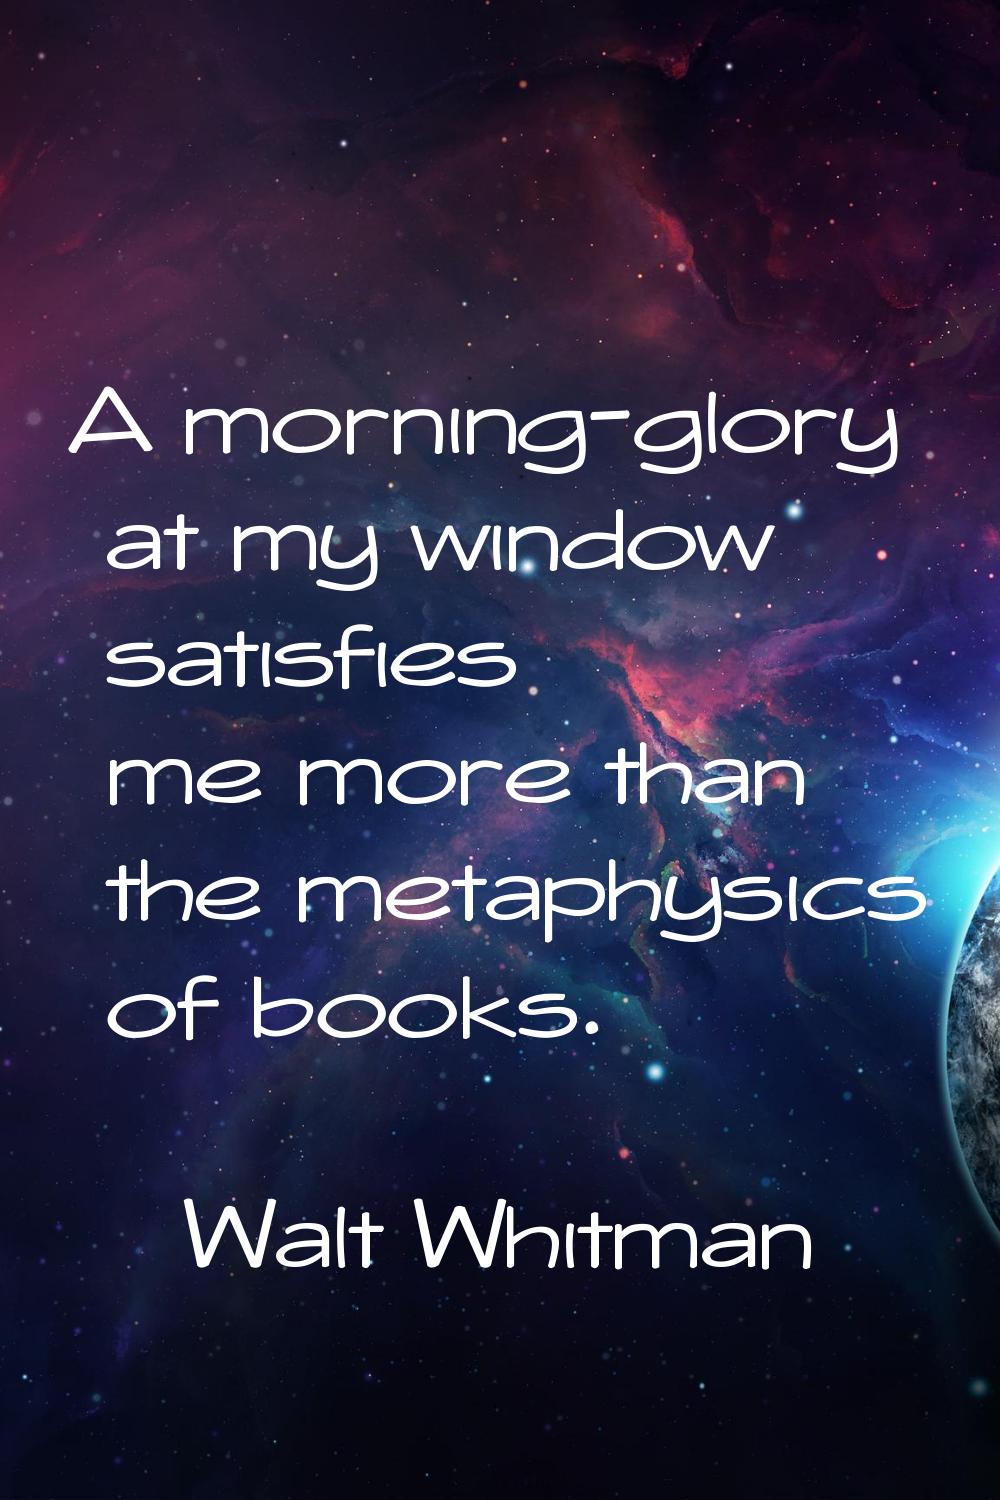 A morning-glory at my window satisfies me more than the metaphysics of books.